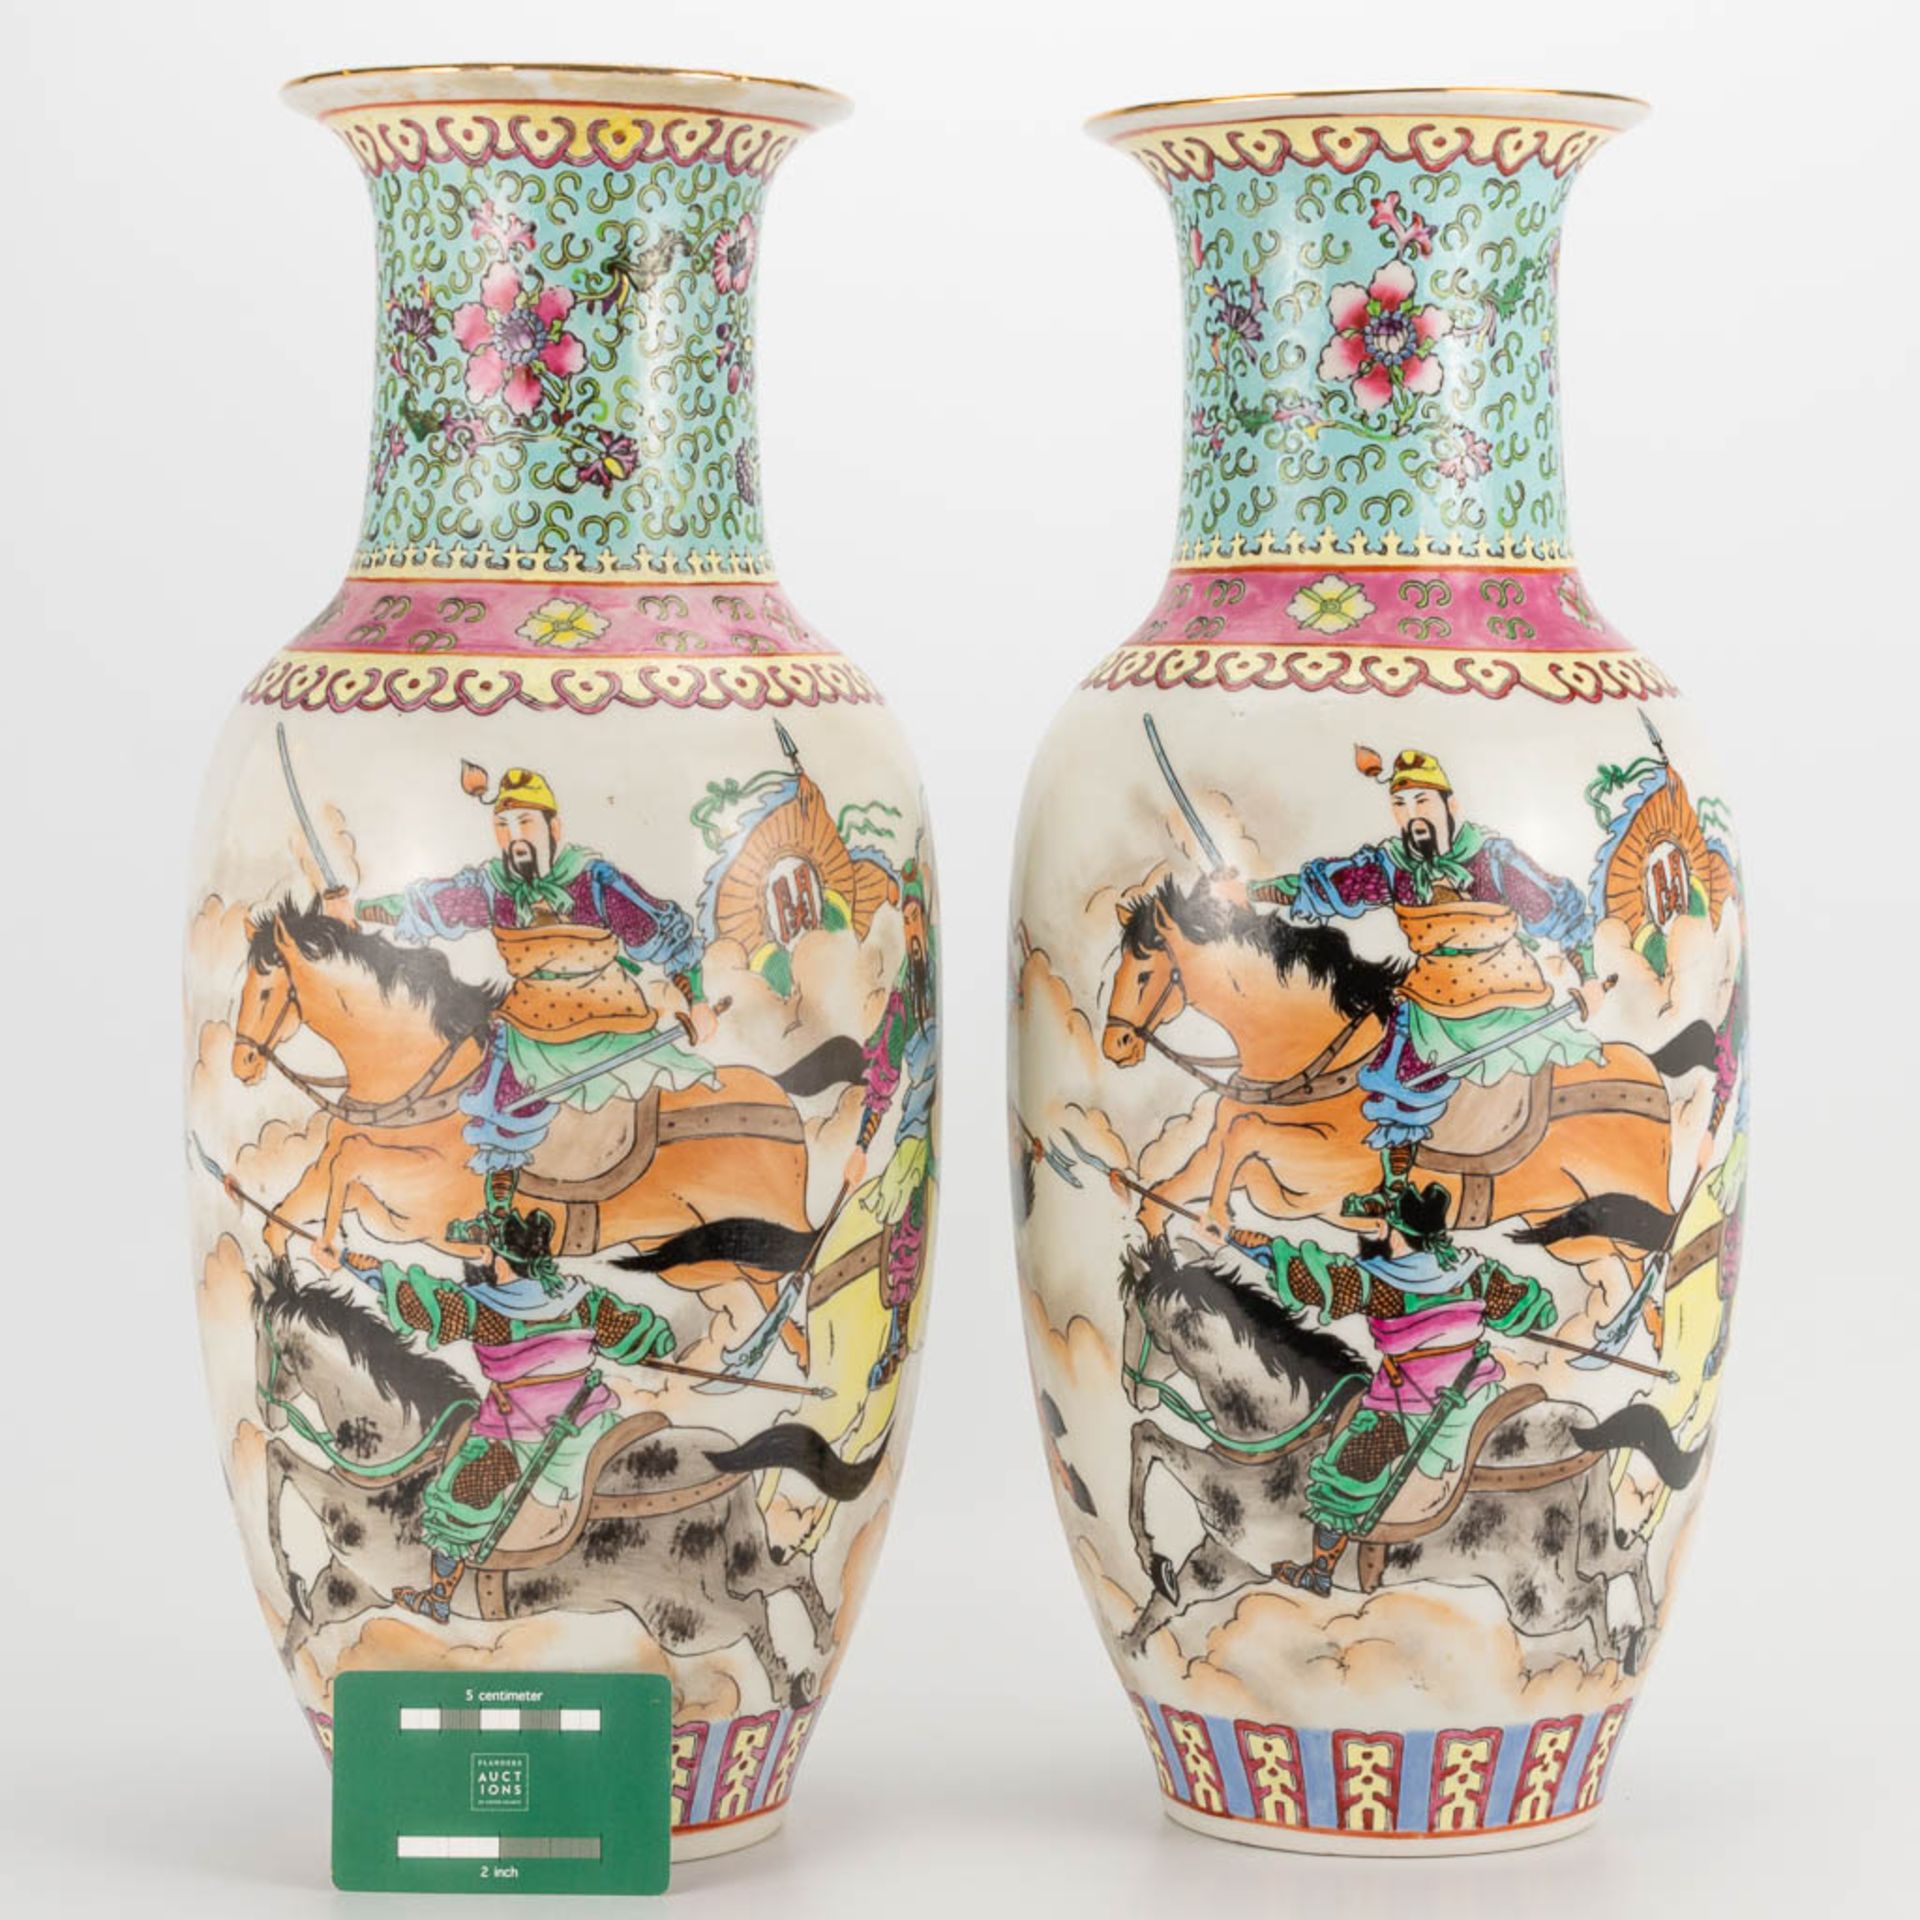 A pair of vases made of Chinese porcelain with decors of knights. 20th century. (46 x 18 cm) - Image 14 of 27